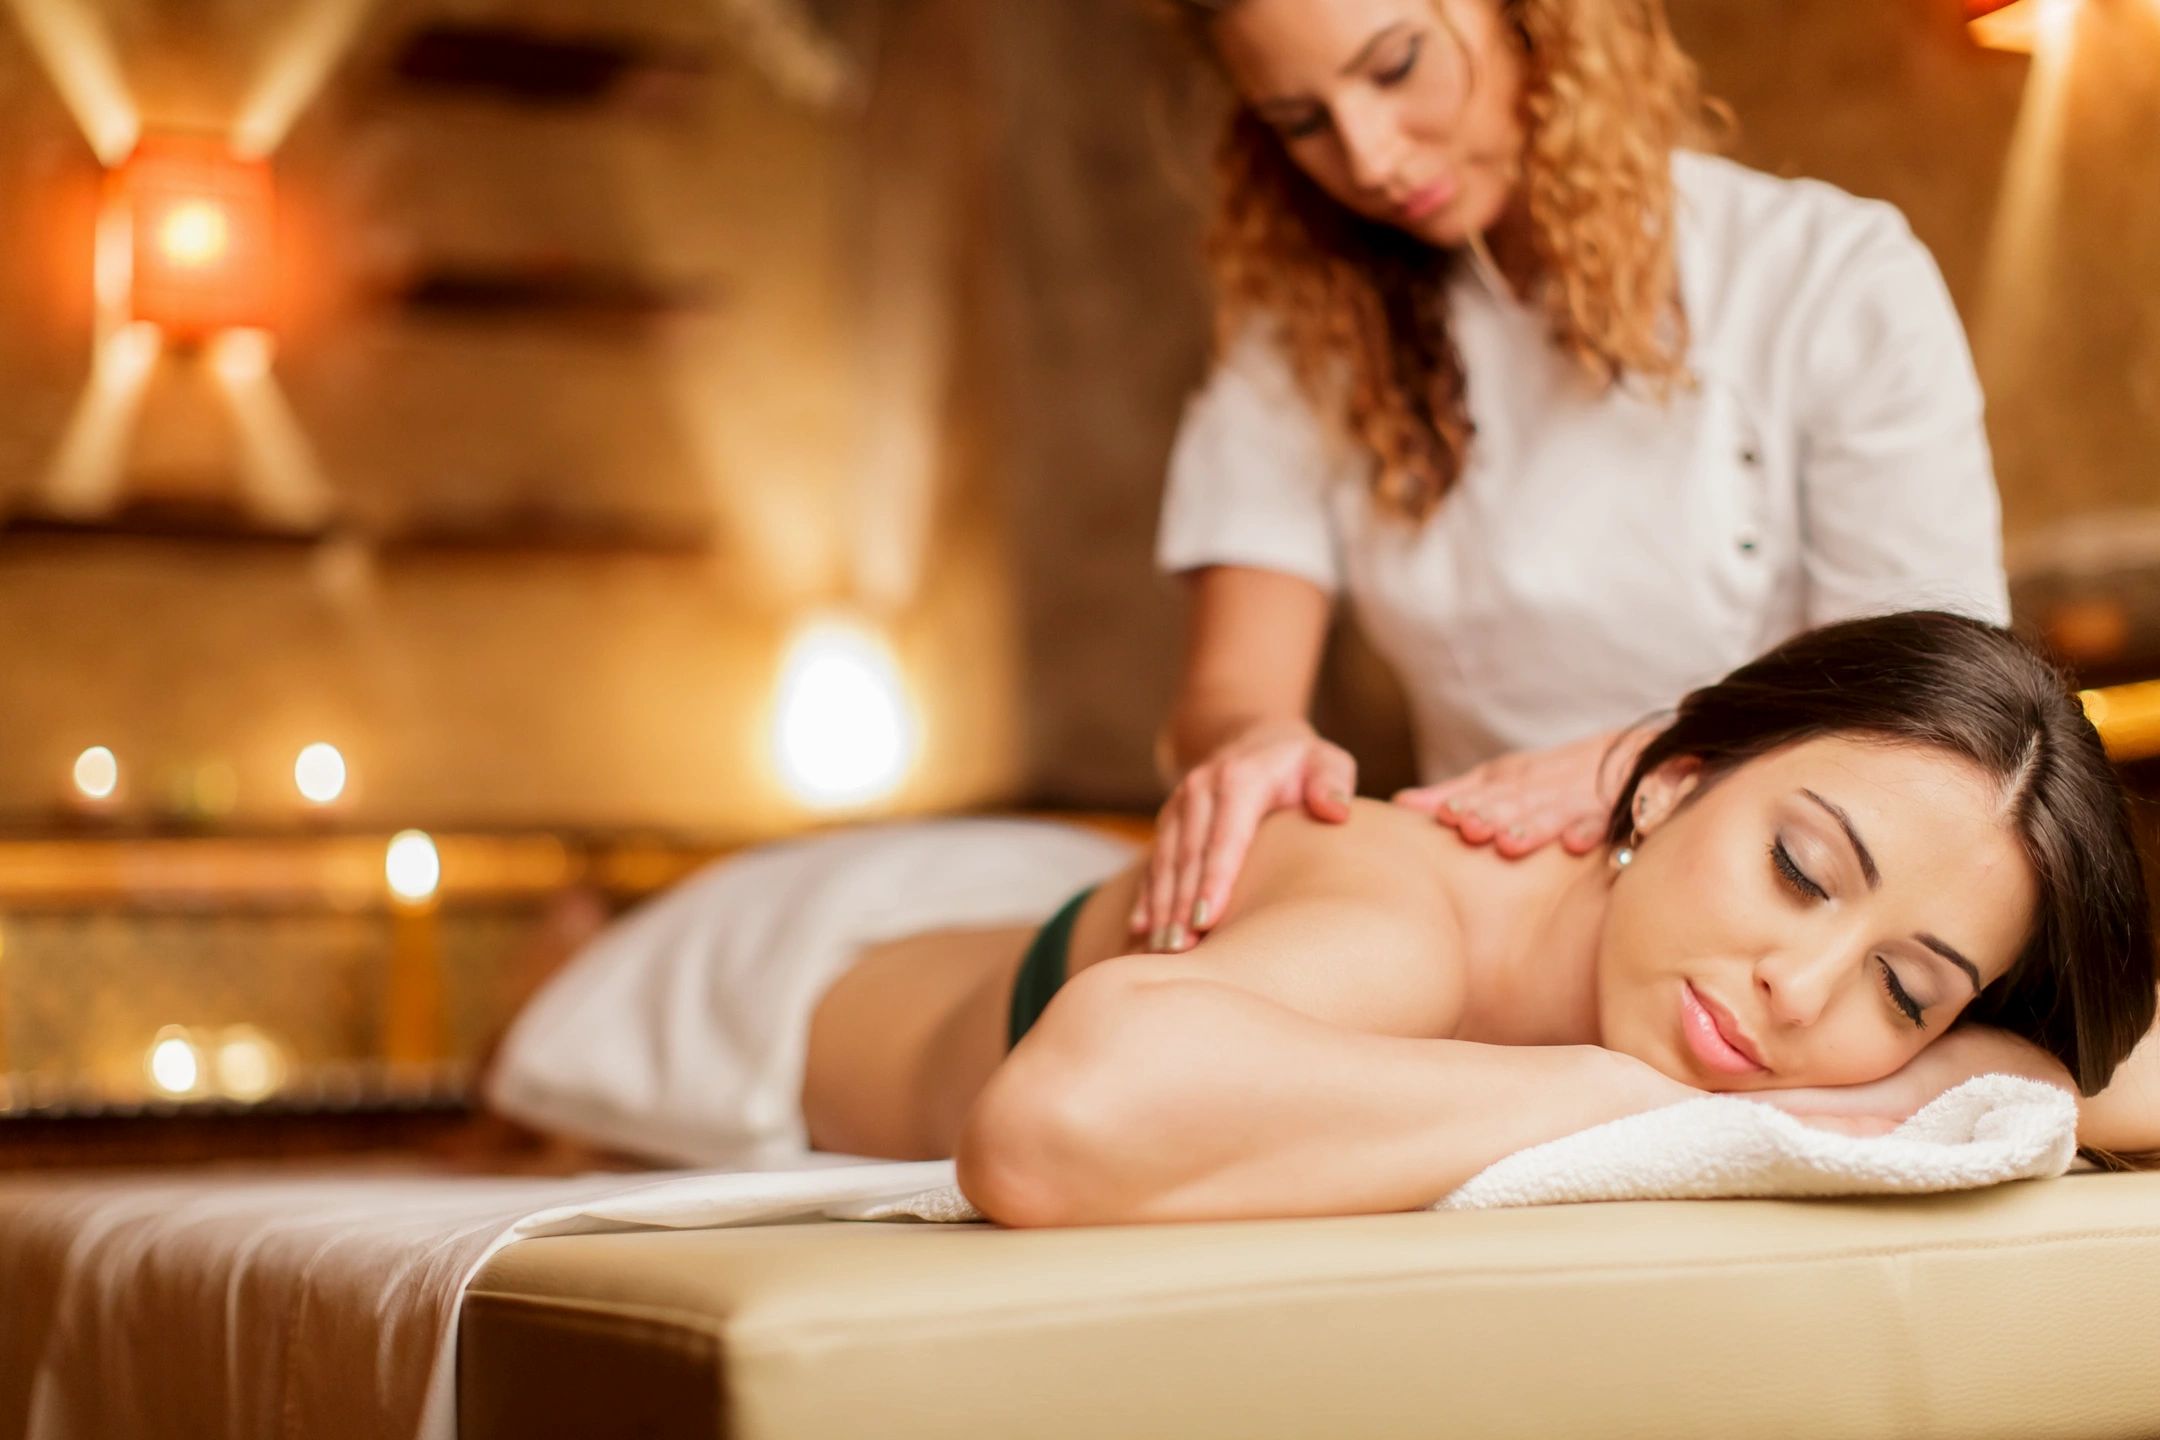 Travel to You Clinical Massage